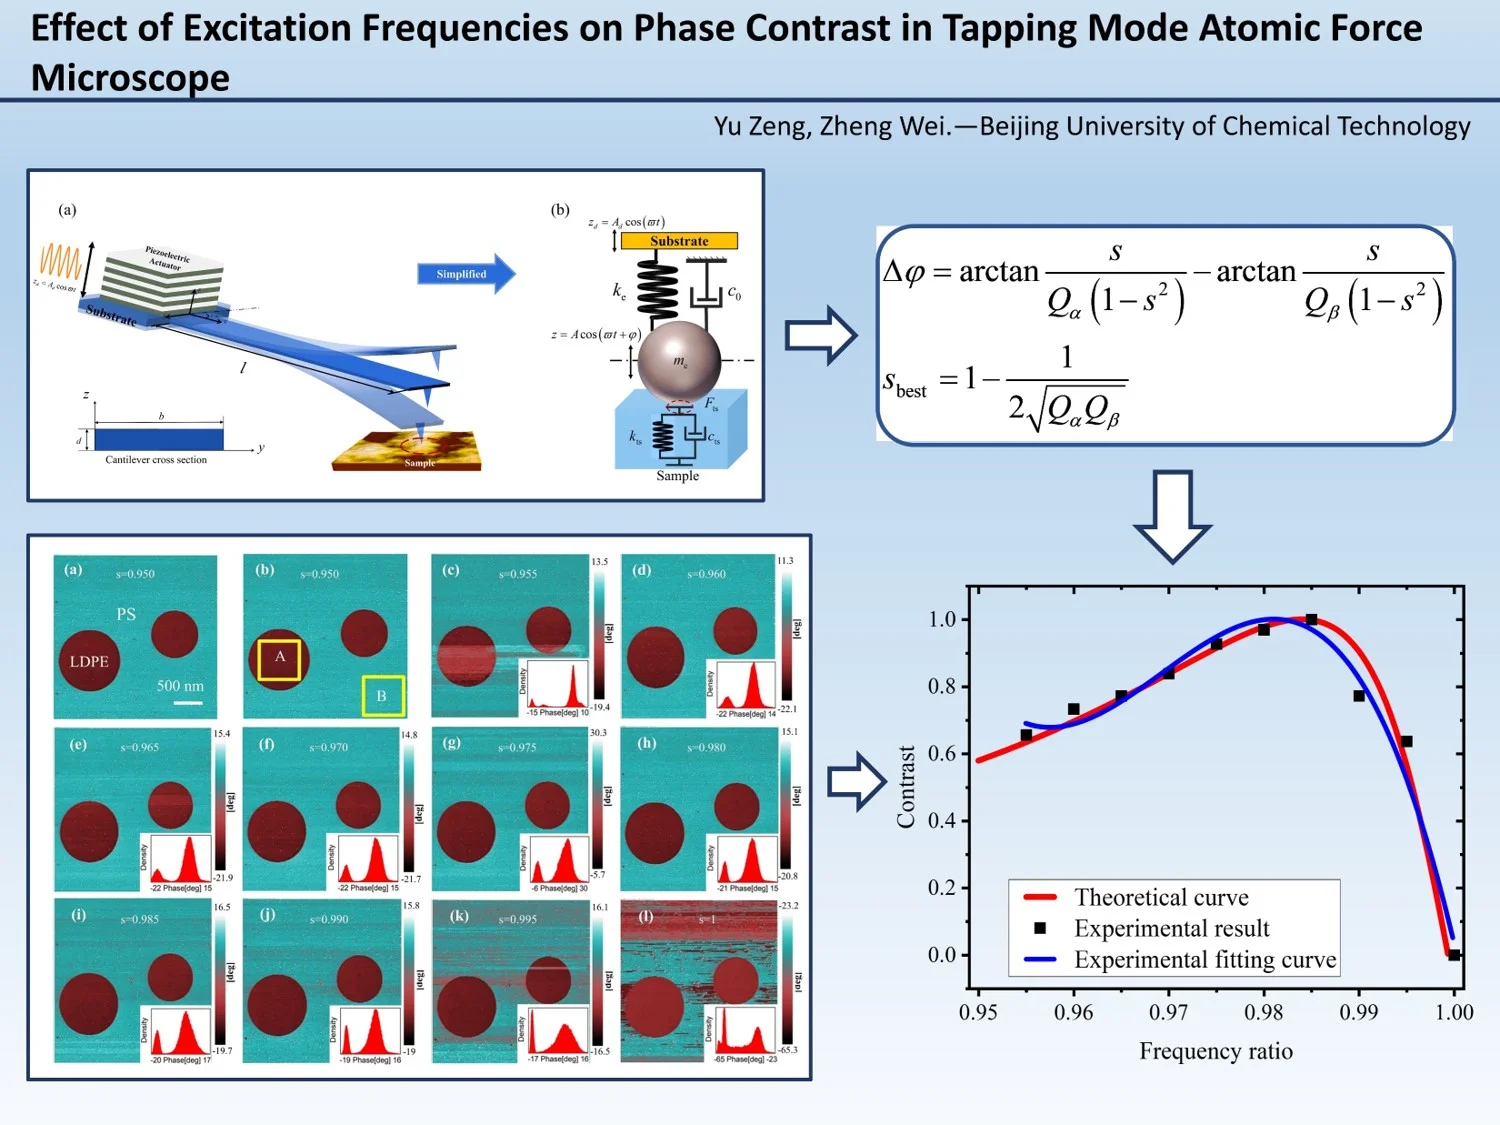 Effect of excitation frequencies on phase contrast in tapping mode atomic force microscope